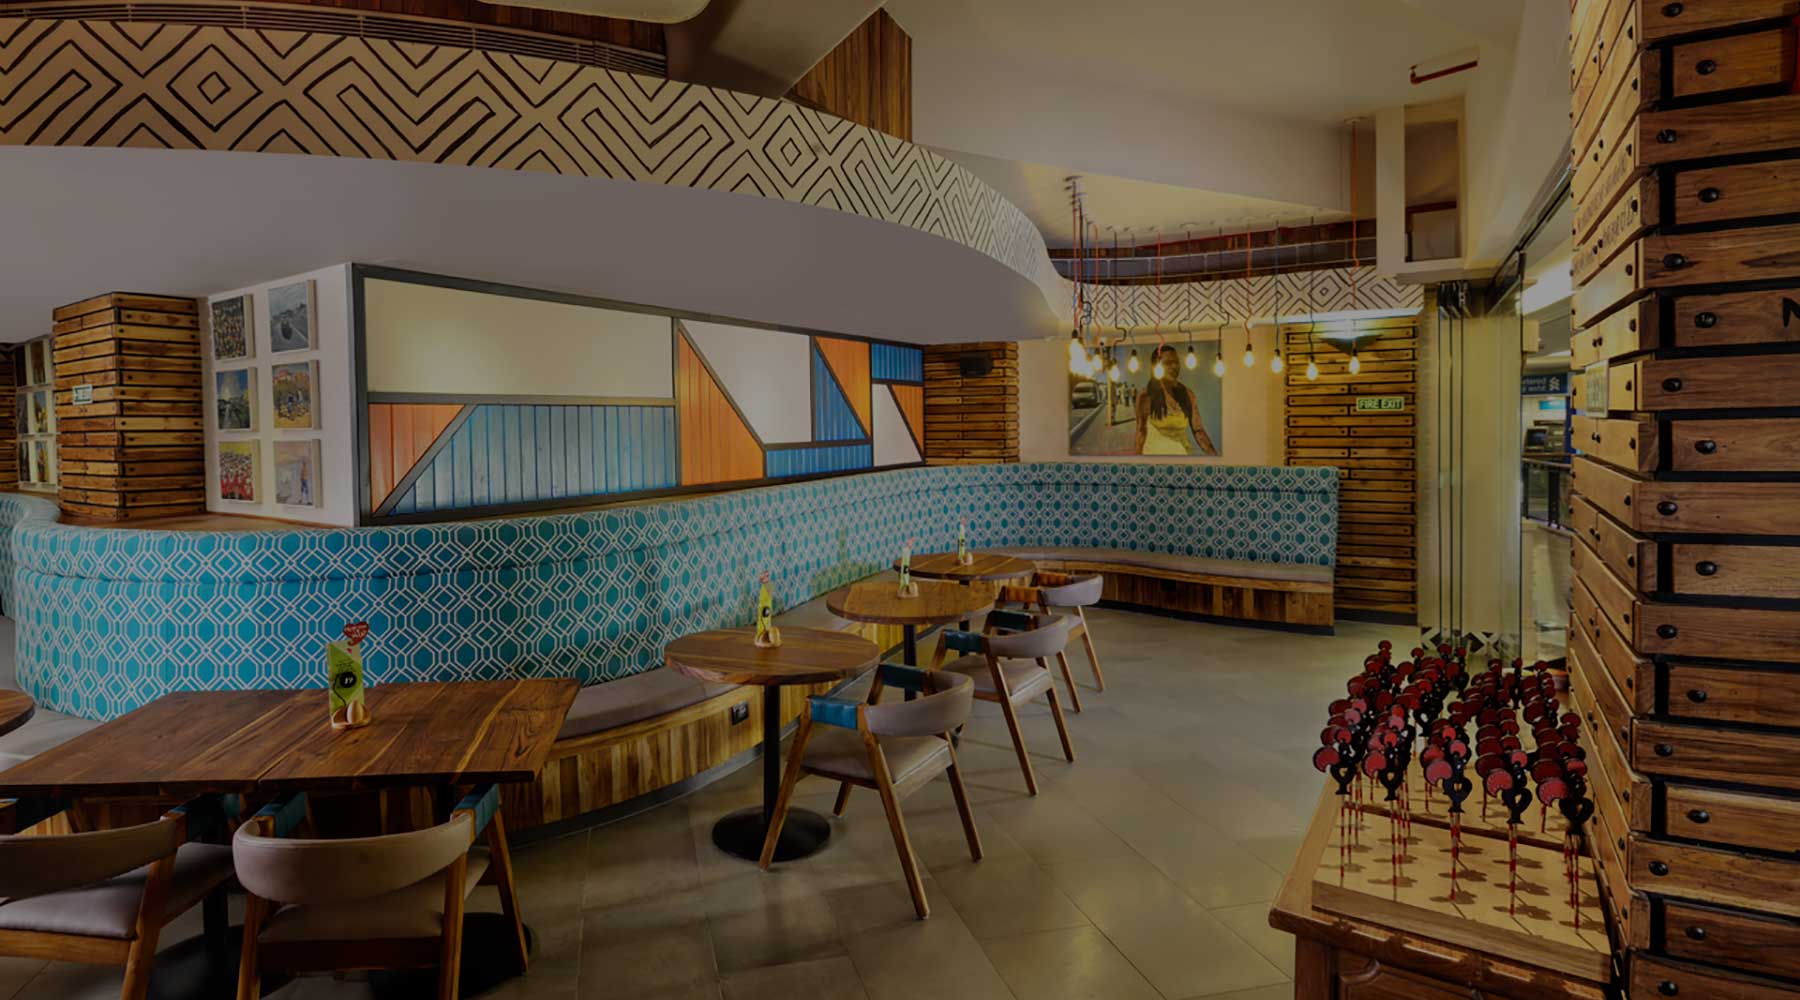 Nando's Punjabi Bagh (Delivery, Takeout & Dine-In only)